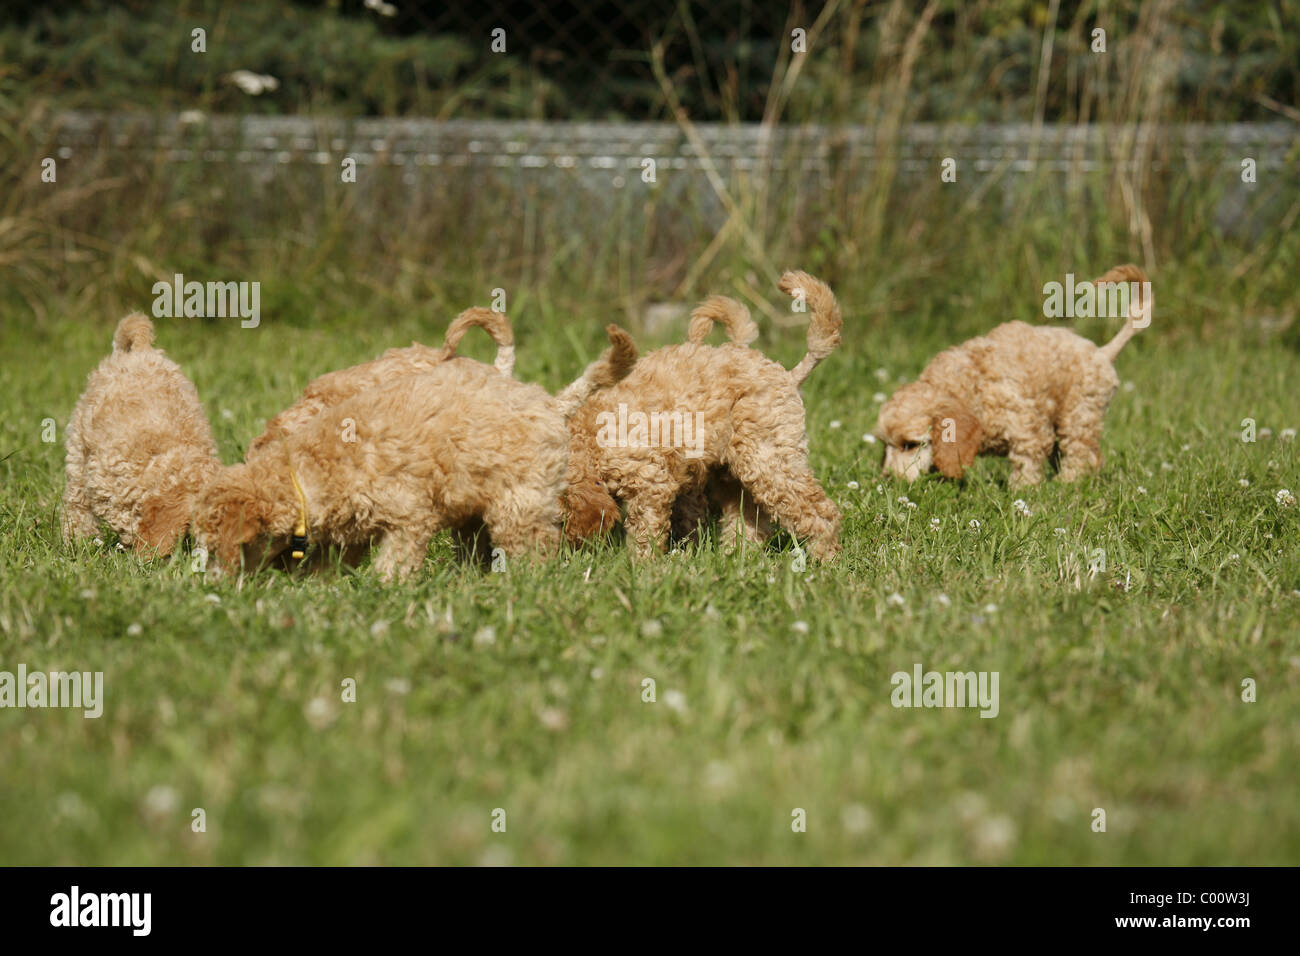 Pudel Welpe / poodle puppy Stock Photo